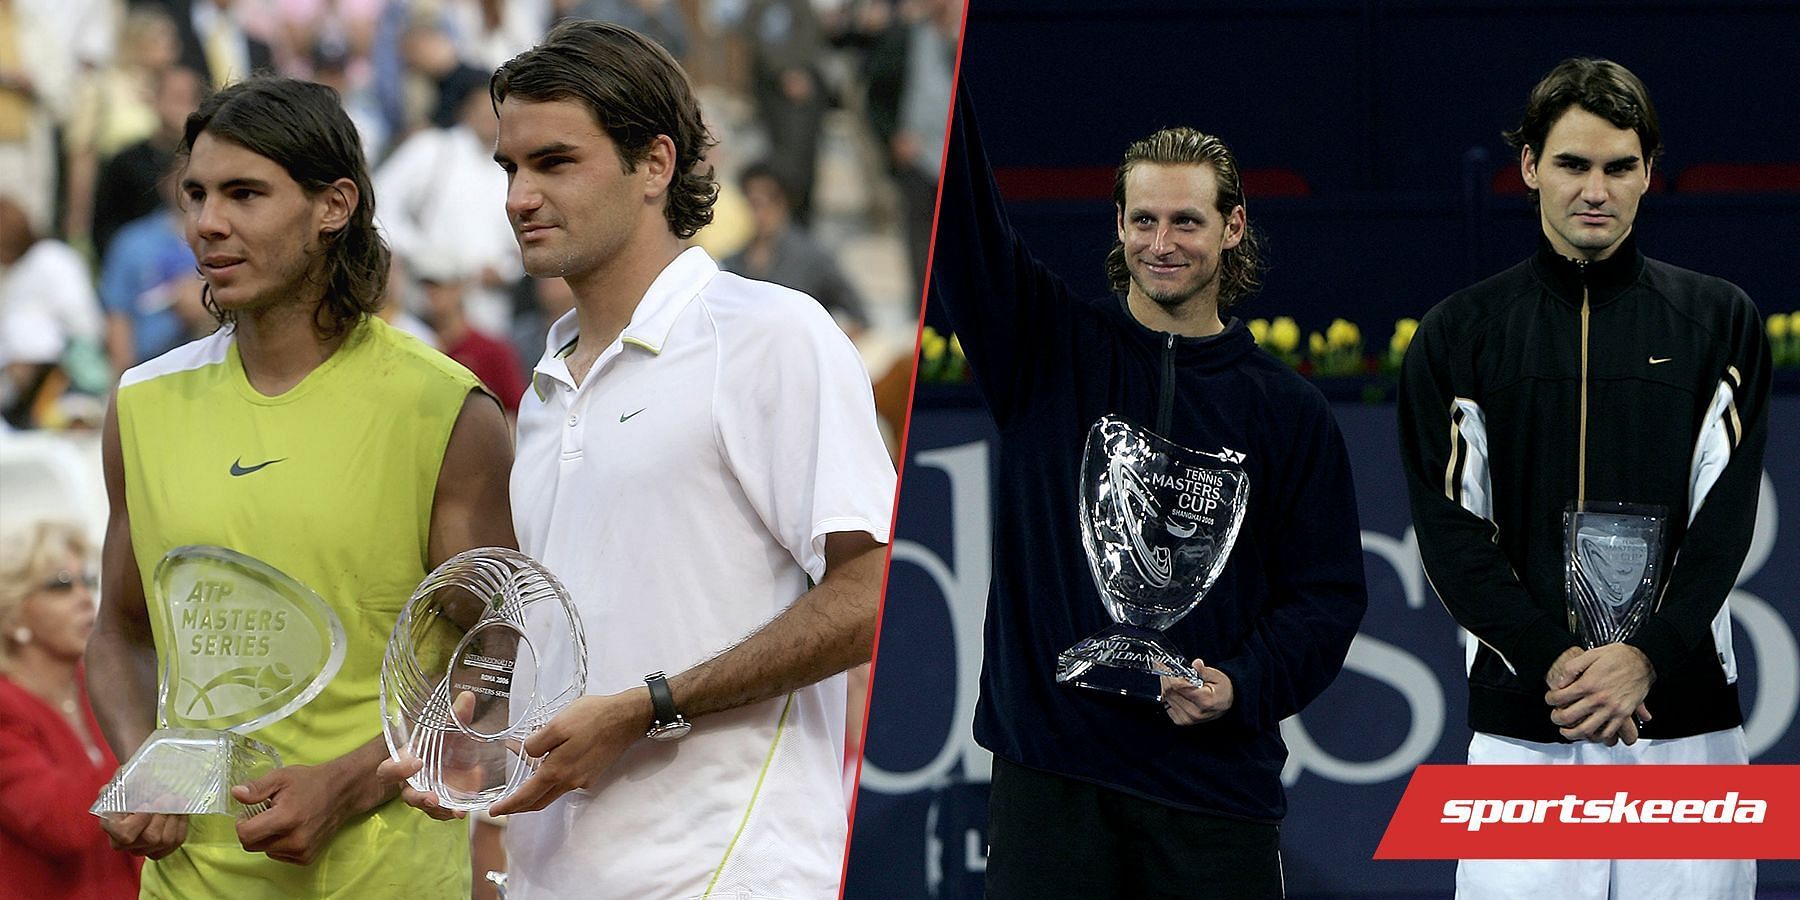 Finalists of the 2005 ATP Finals and the 2006 Rome Masters